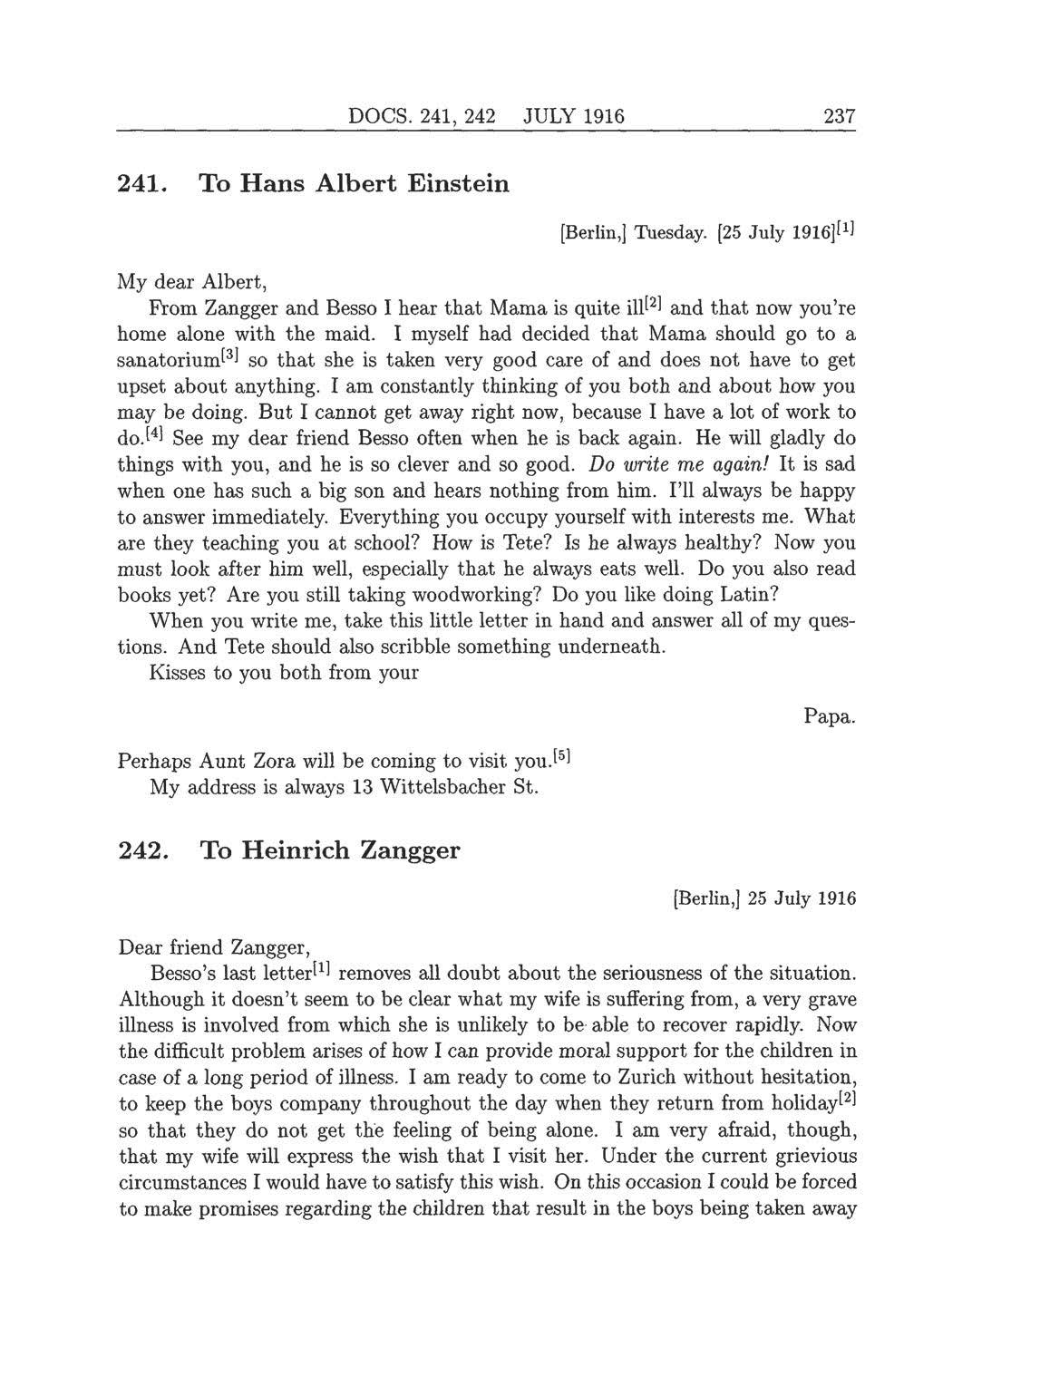 Volume 8: The Berlin Years: Correspondence, 1914-1918 (English translation supplement) page 237